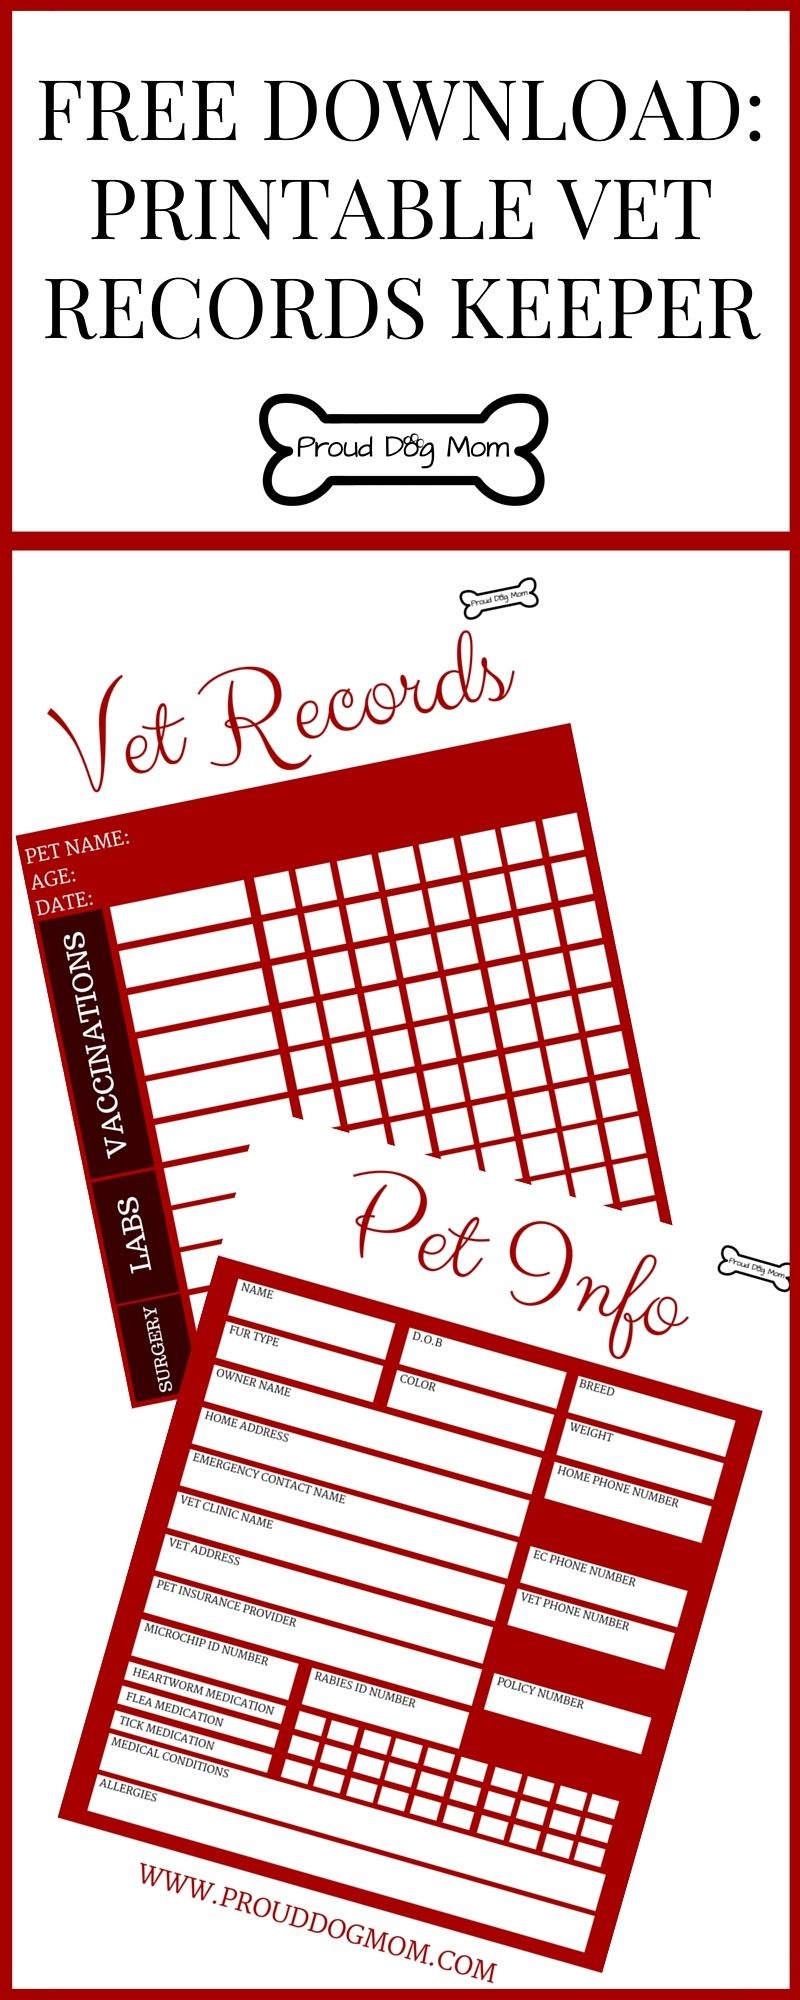 Puppy Records Template Immunization Record Card Dogs Whelping